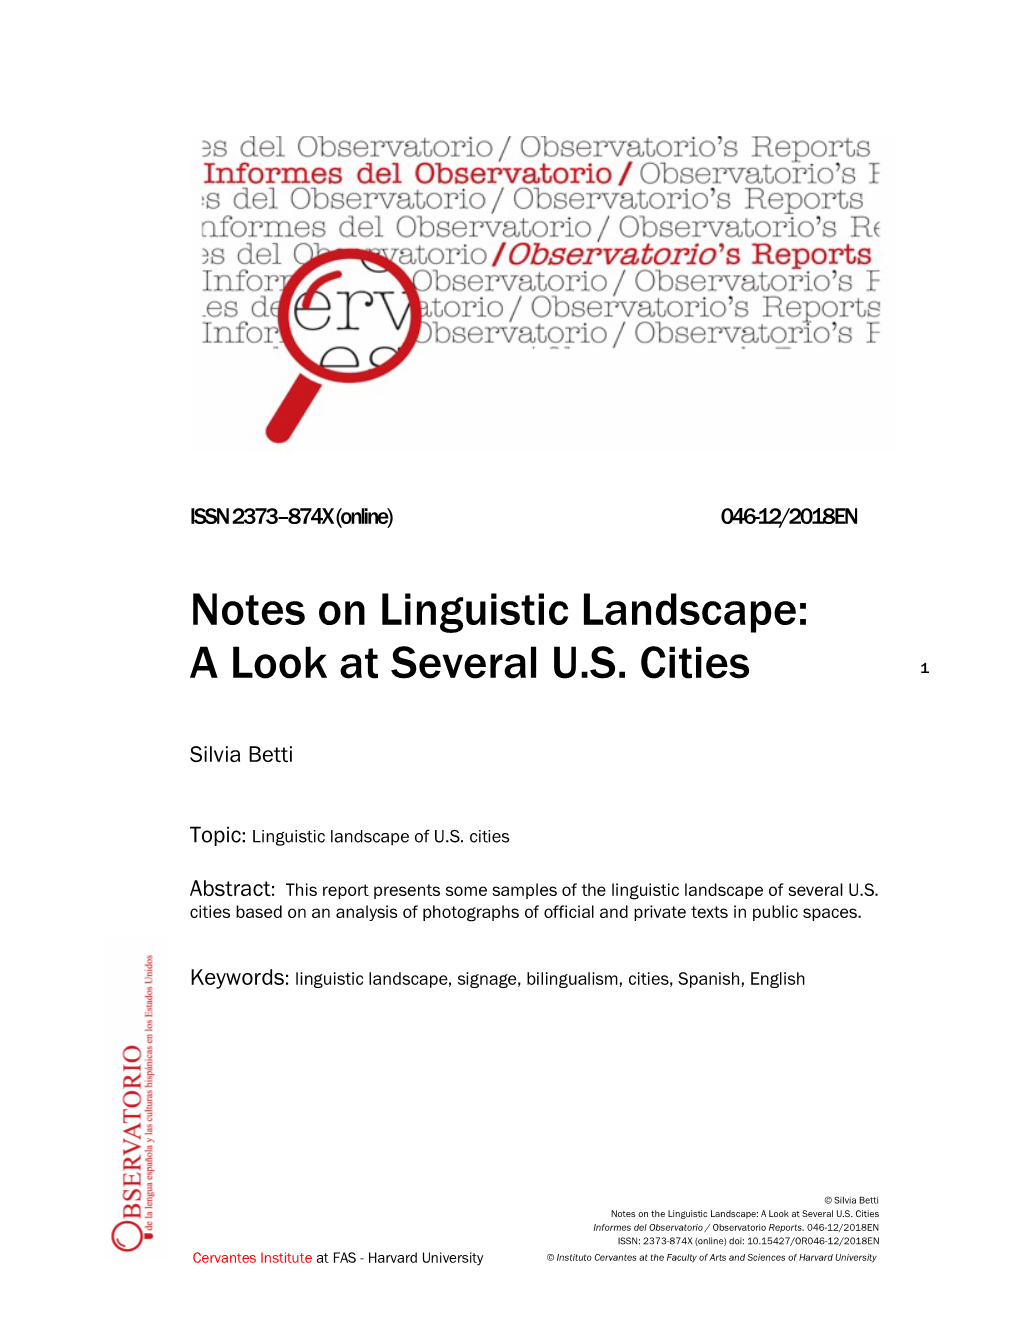 Notes on Linguistic Landscape: a Look at Several U.S